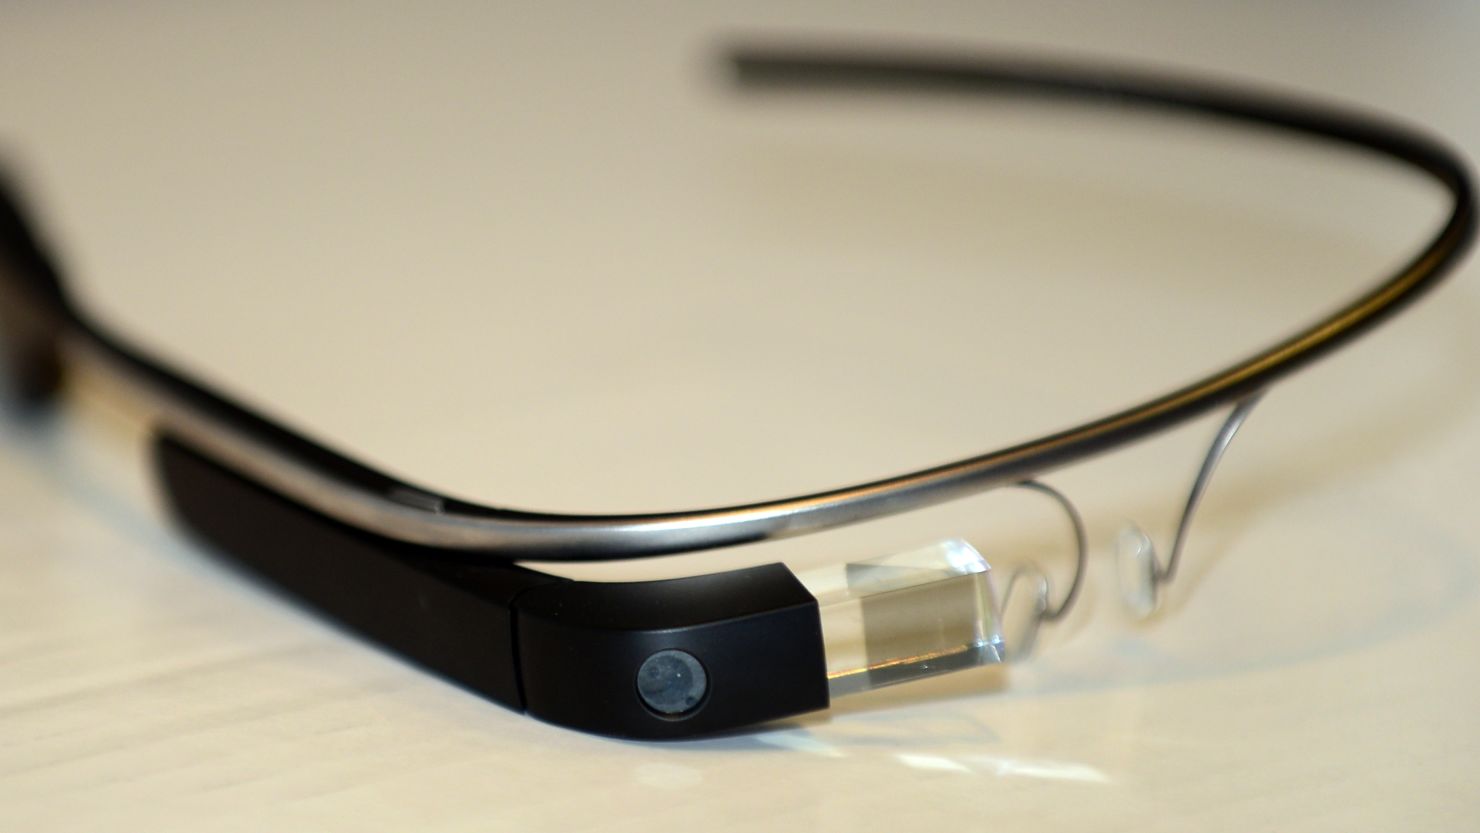 New Google Glass will work better with eyeglasses and include an ear bud for better audio, Google says.